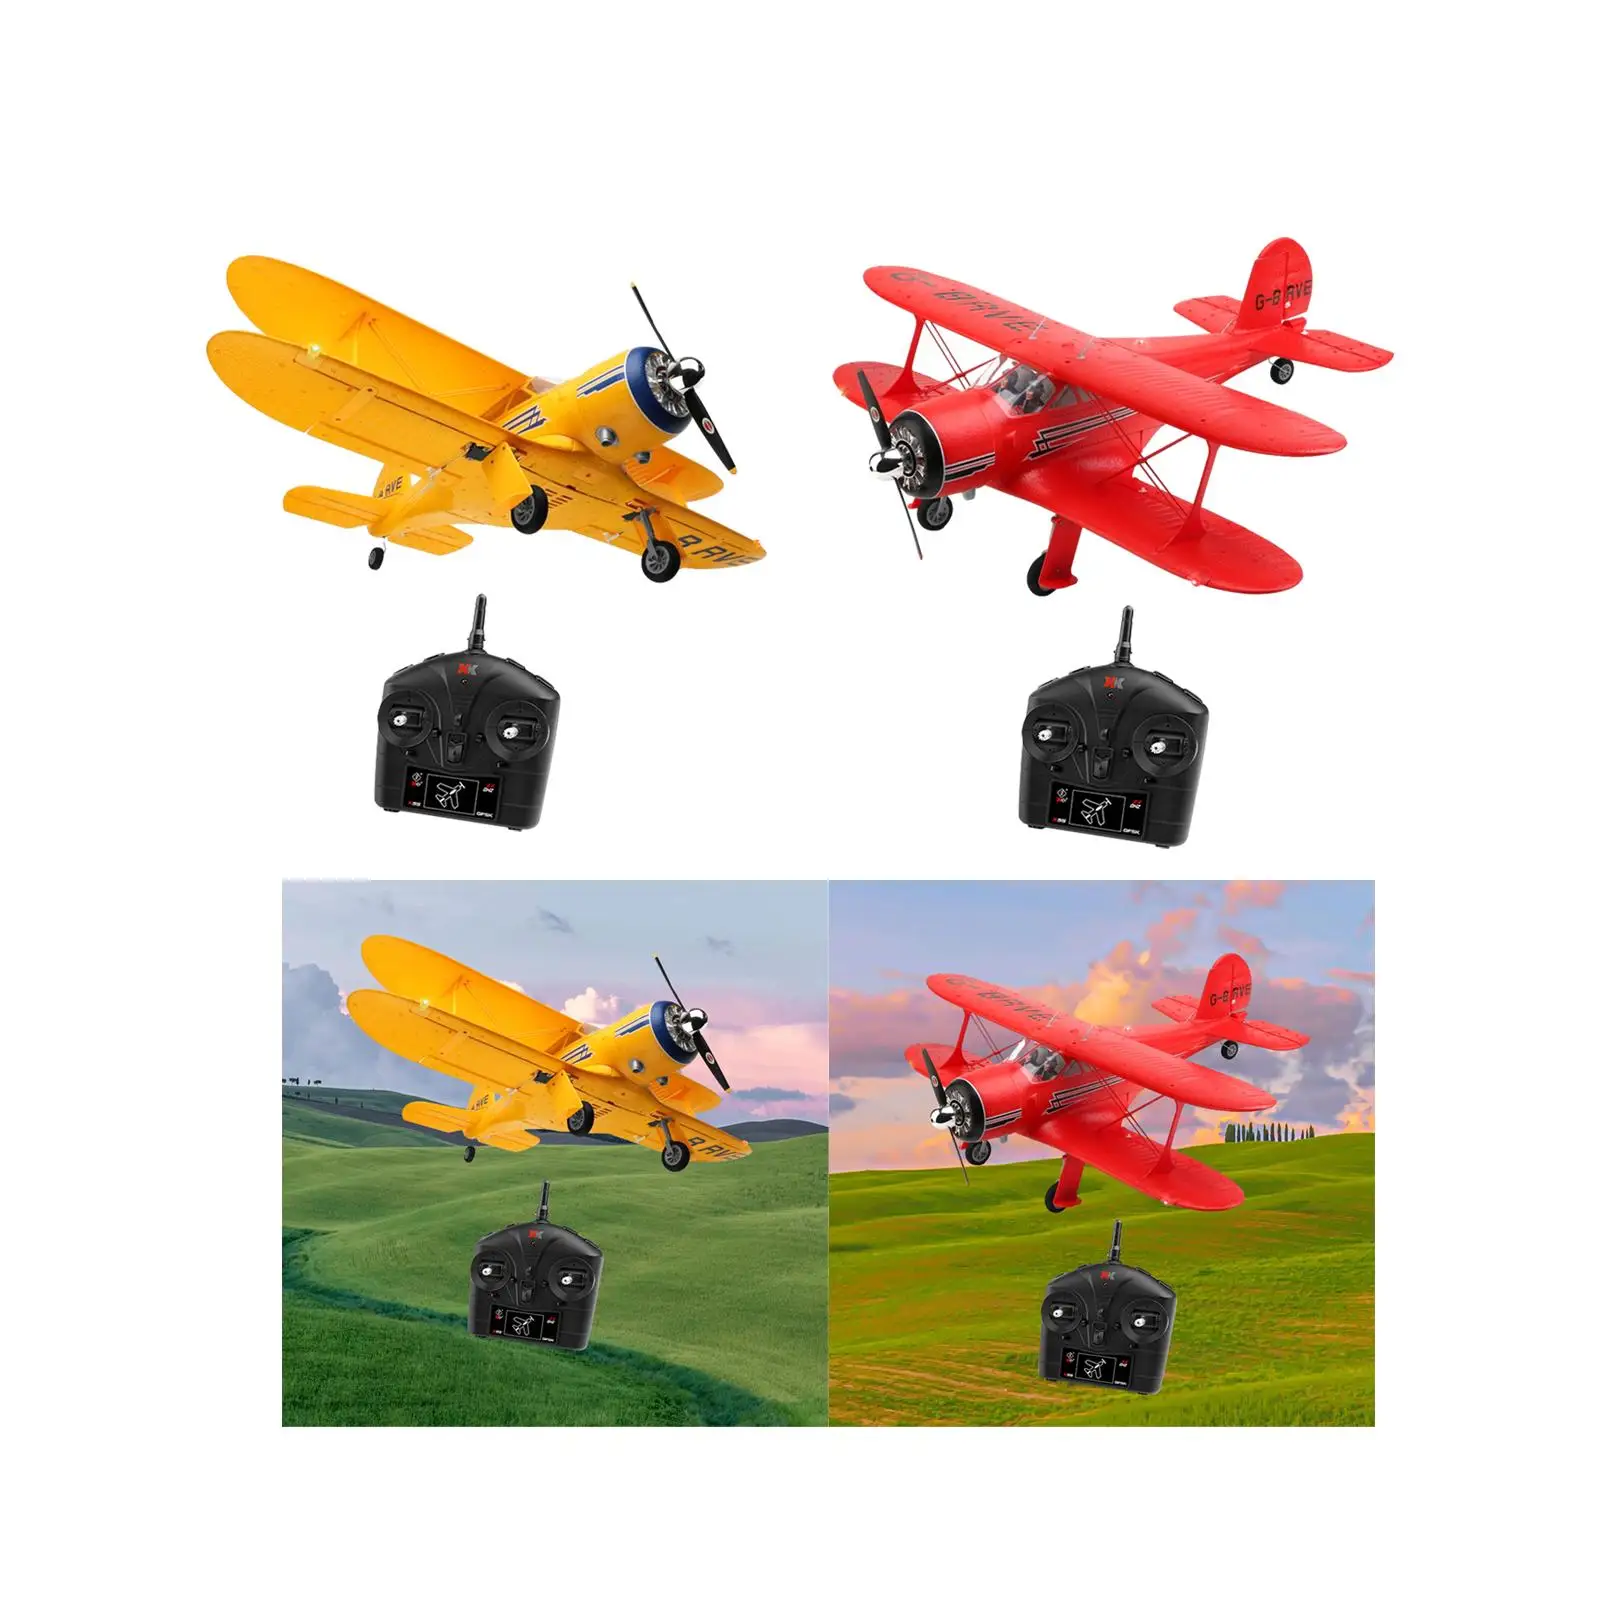 RC Glider Foam Easy to Fly 150M Remote Control Distance Remote Control Aircraft for Boy Gift for Kids and Adults Outdoor Toys